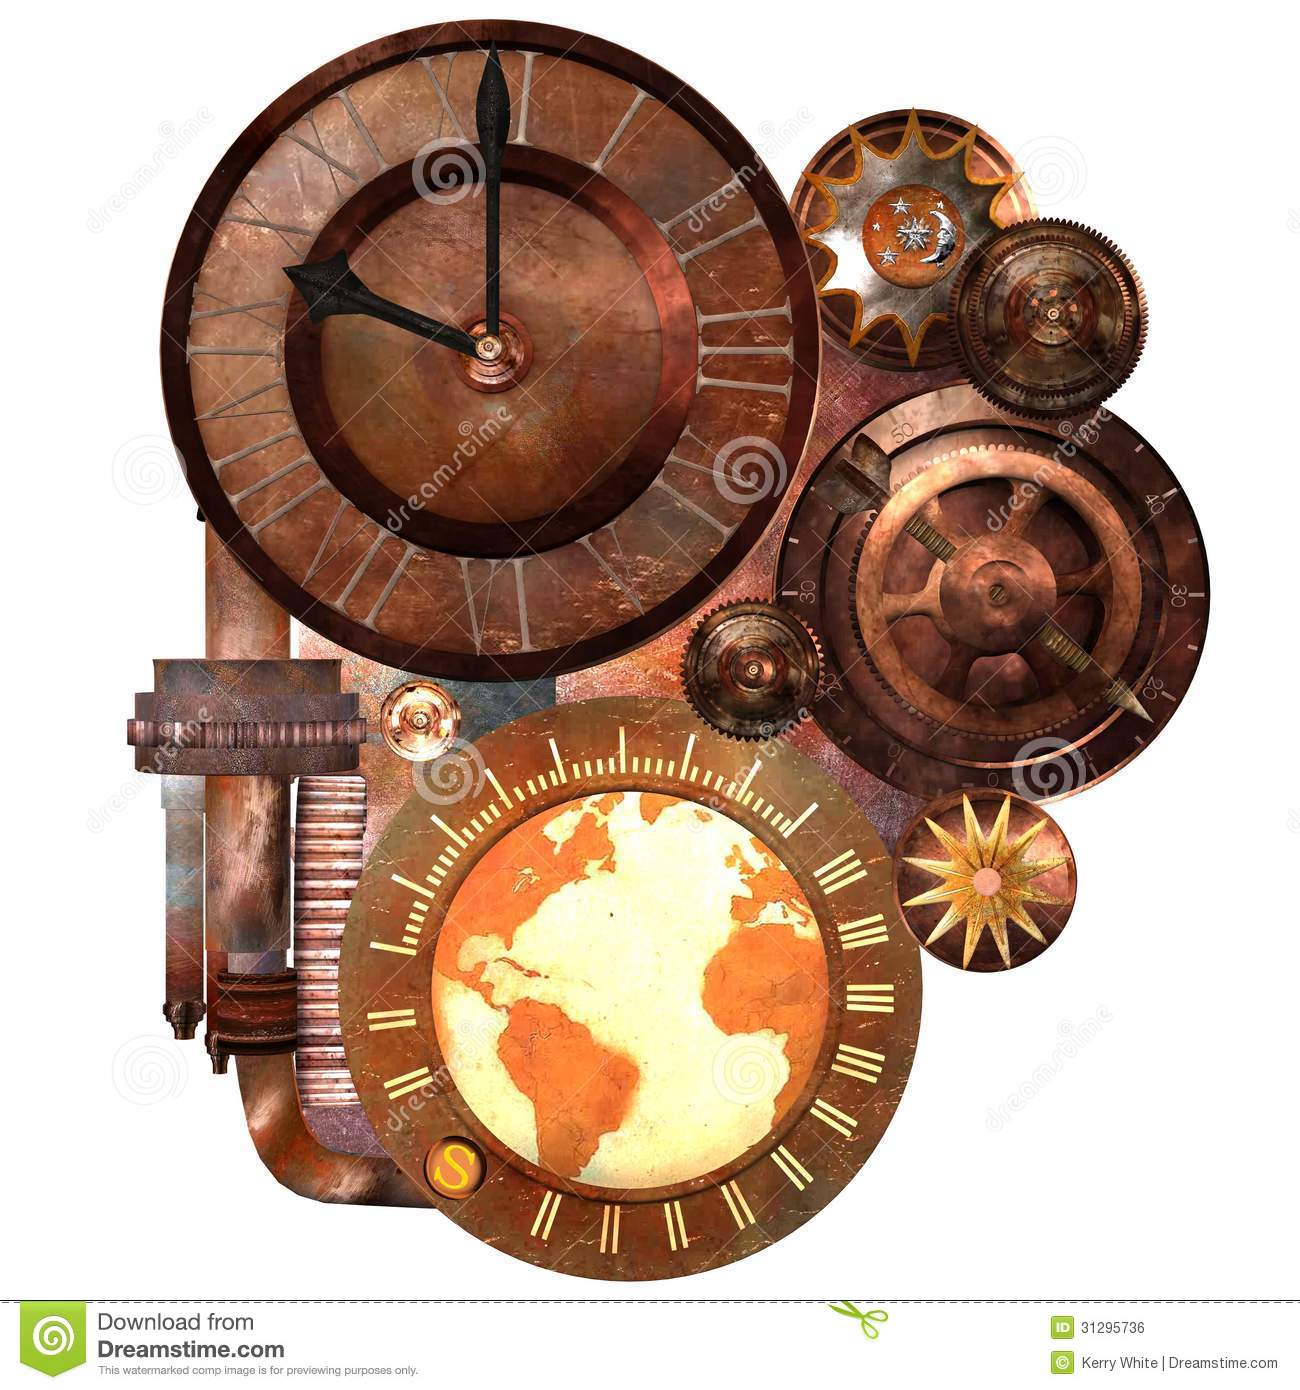 Royalty Free Stock Image  Steampunk Clock And Gears